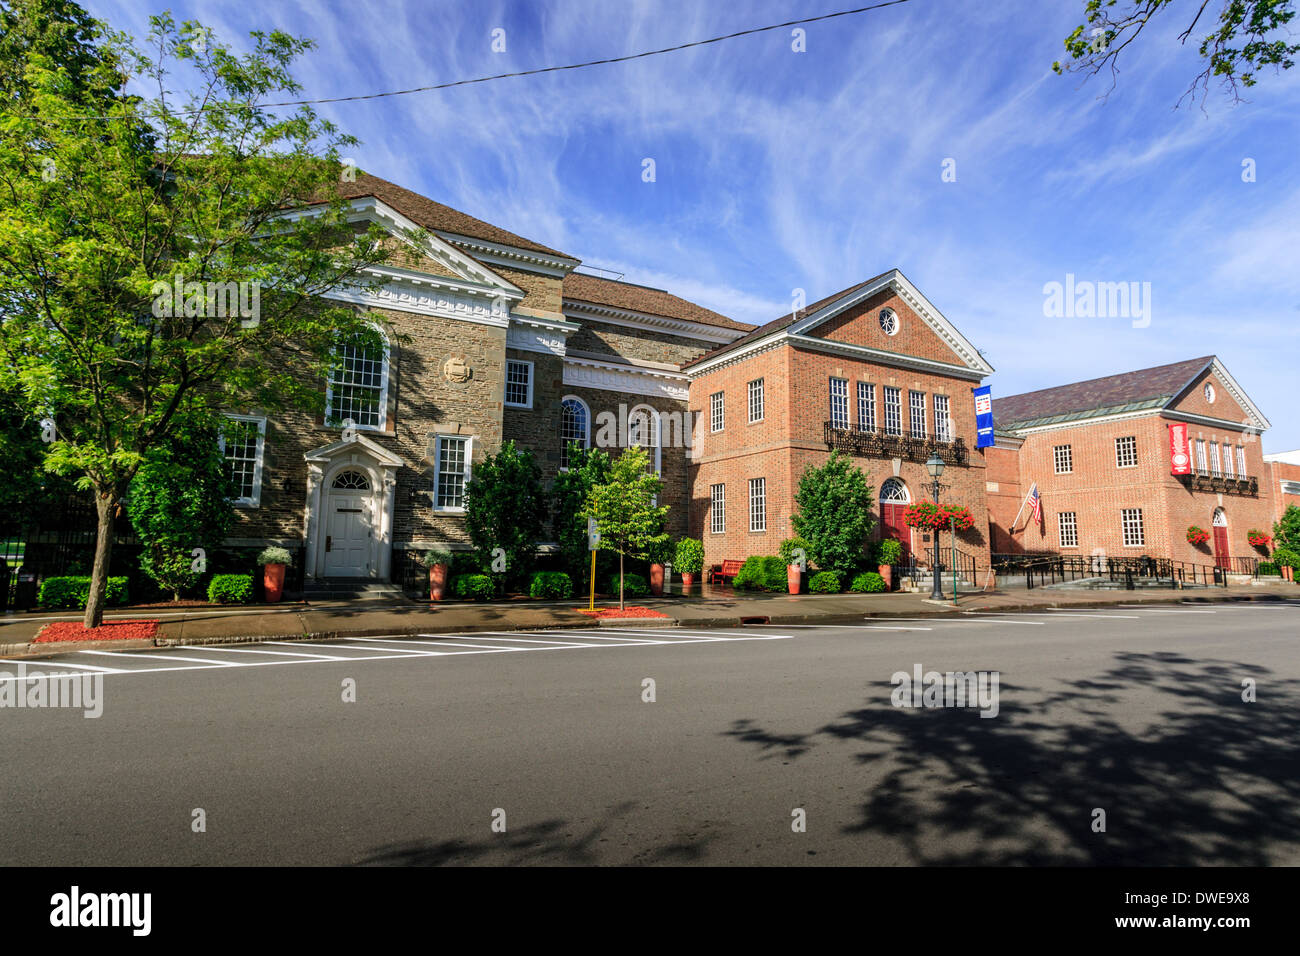 National Baseball Hall of Fame and Museum, Cooperstown, Otsego County, New York State, USA. Stock Photo